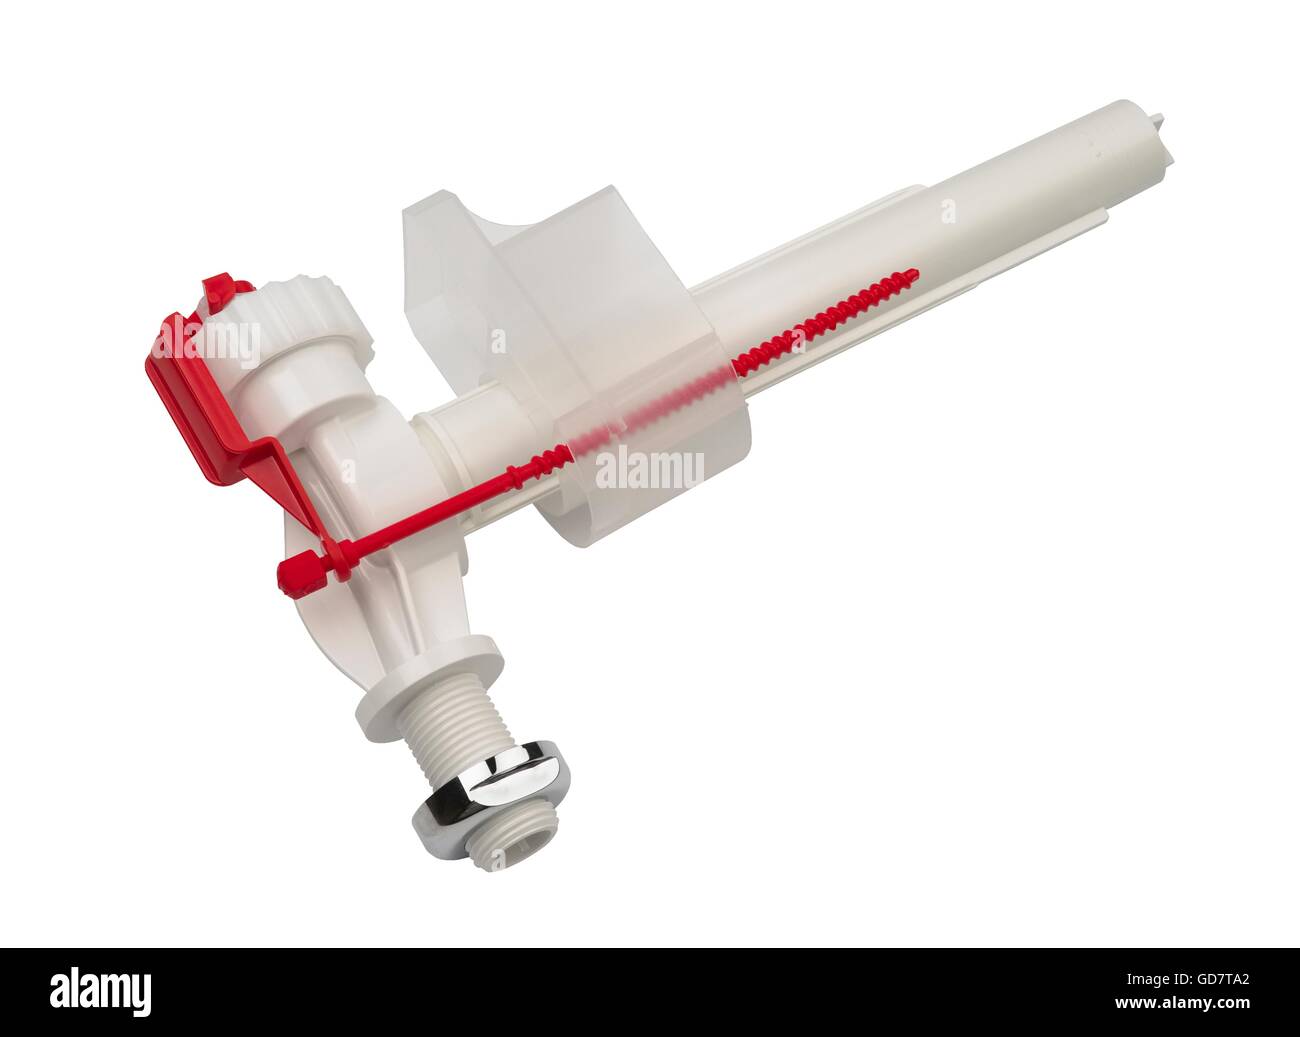 Inlet valve for tank of the toilet bowl on a white background Stock Photo